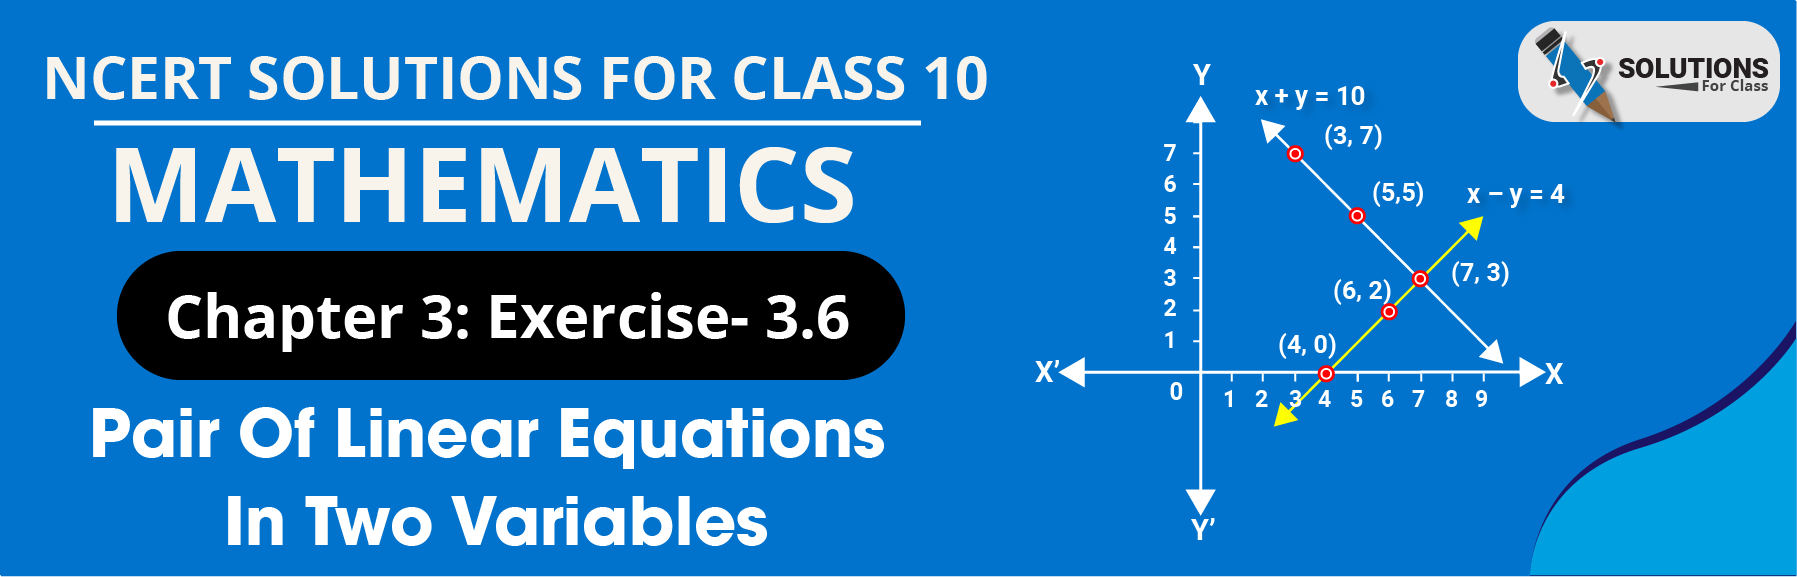 NCERT Solution For Class 10, Maths, Pair Of Linear Equations In Two Variables, Exercise 3.6